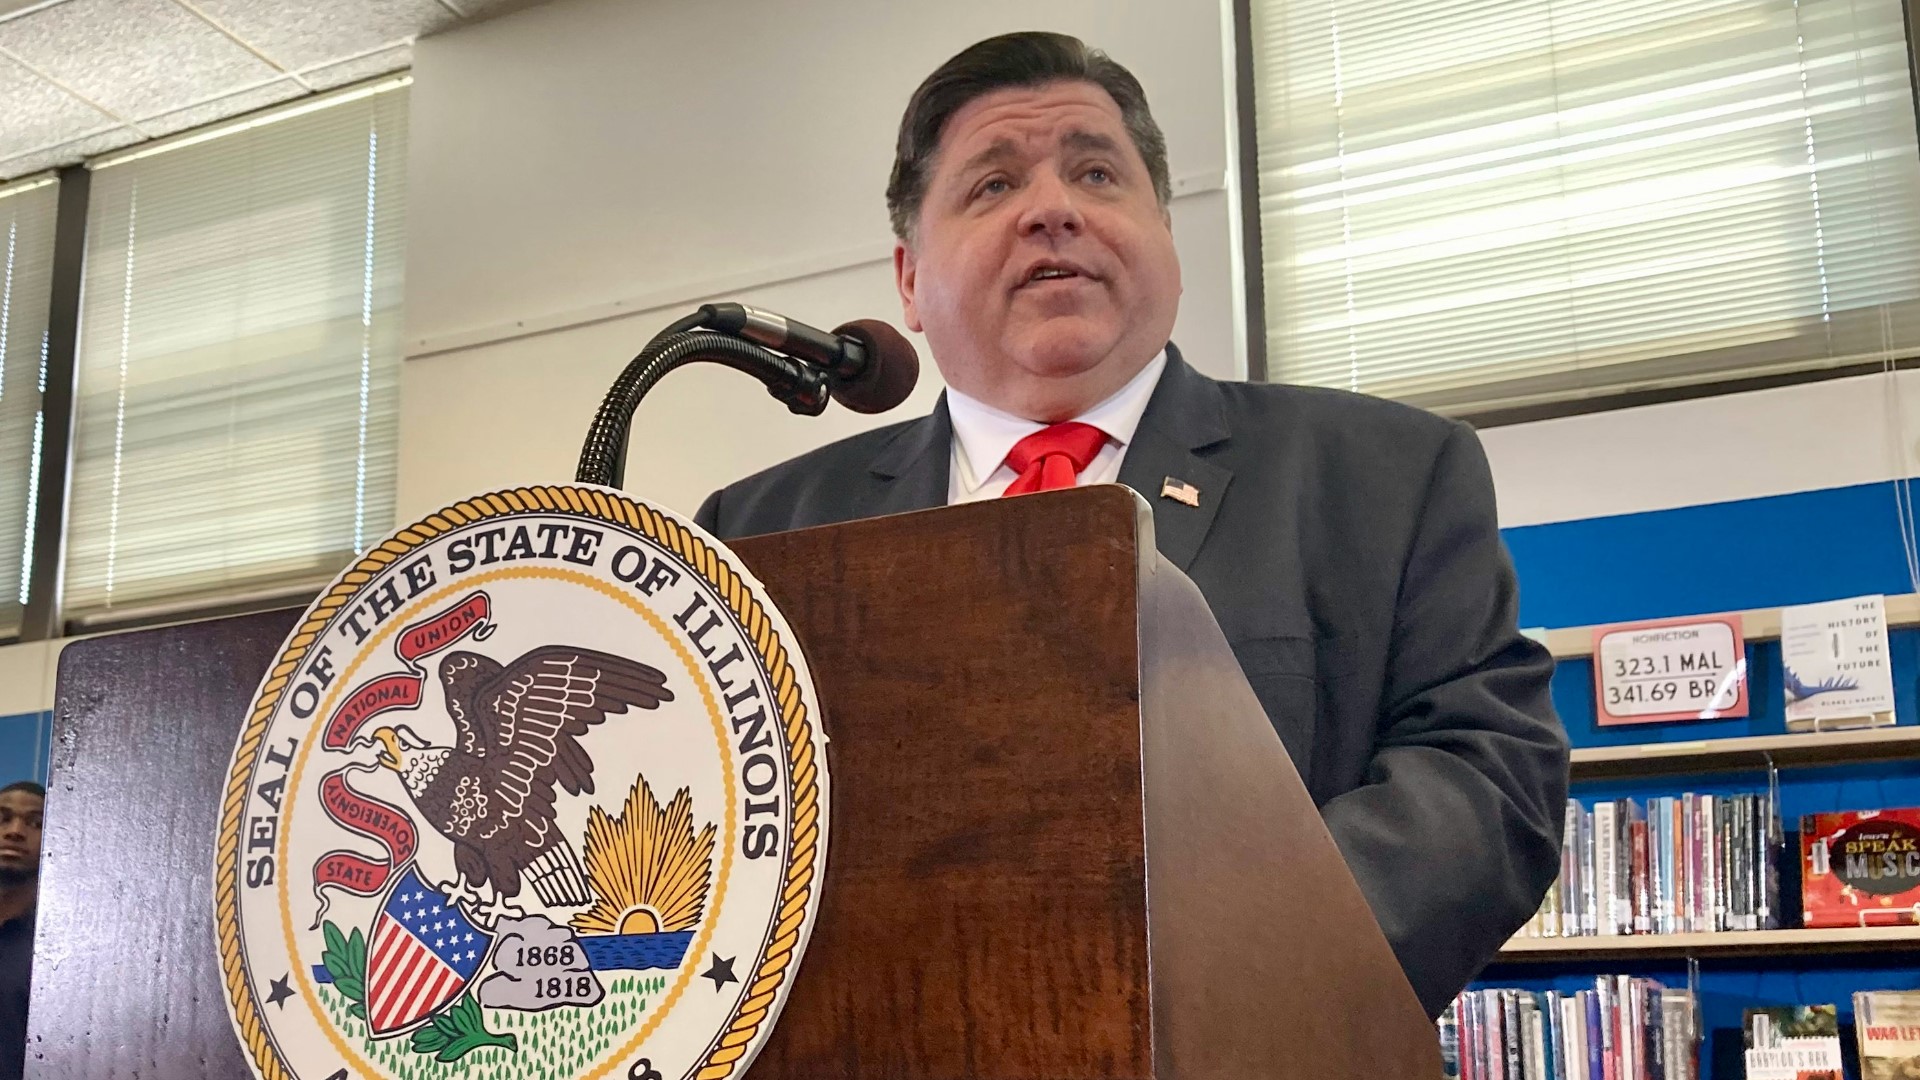 Pritzker signed a bill banning ghost guns in Illinois. Ghost guns are untraceable, which means police can't use serial numbers to connect people to their crimes.